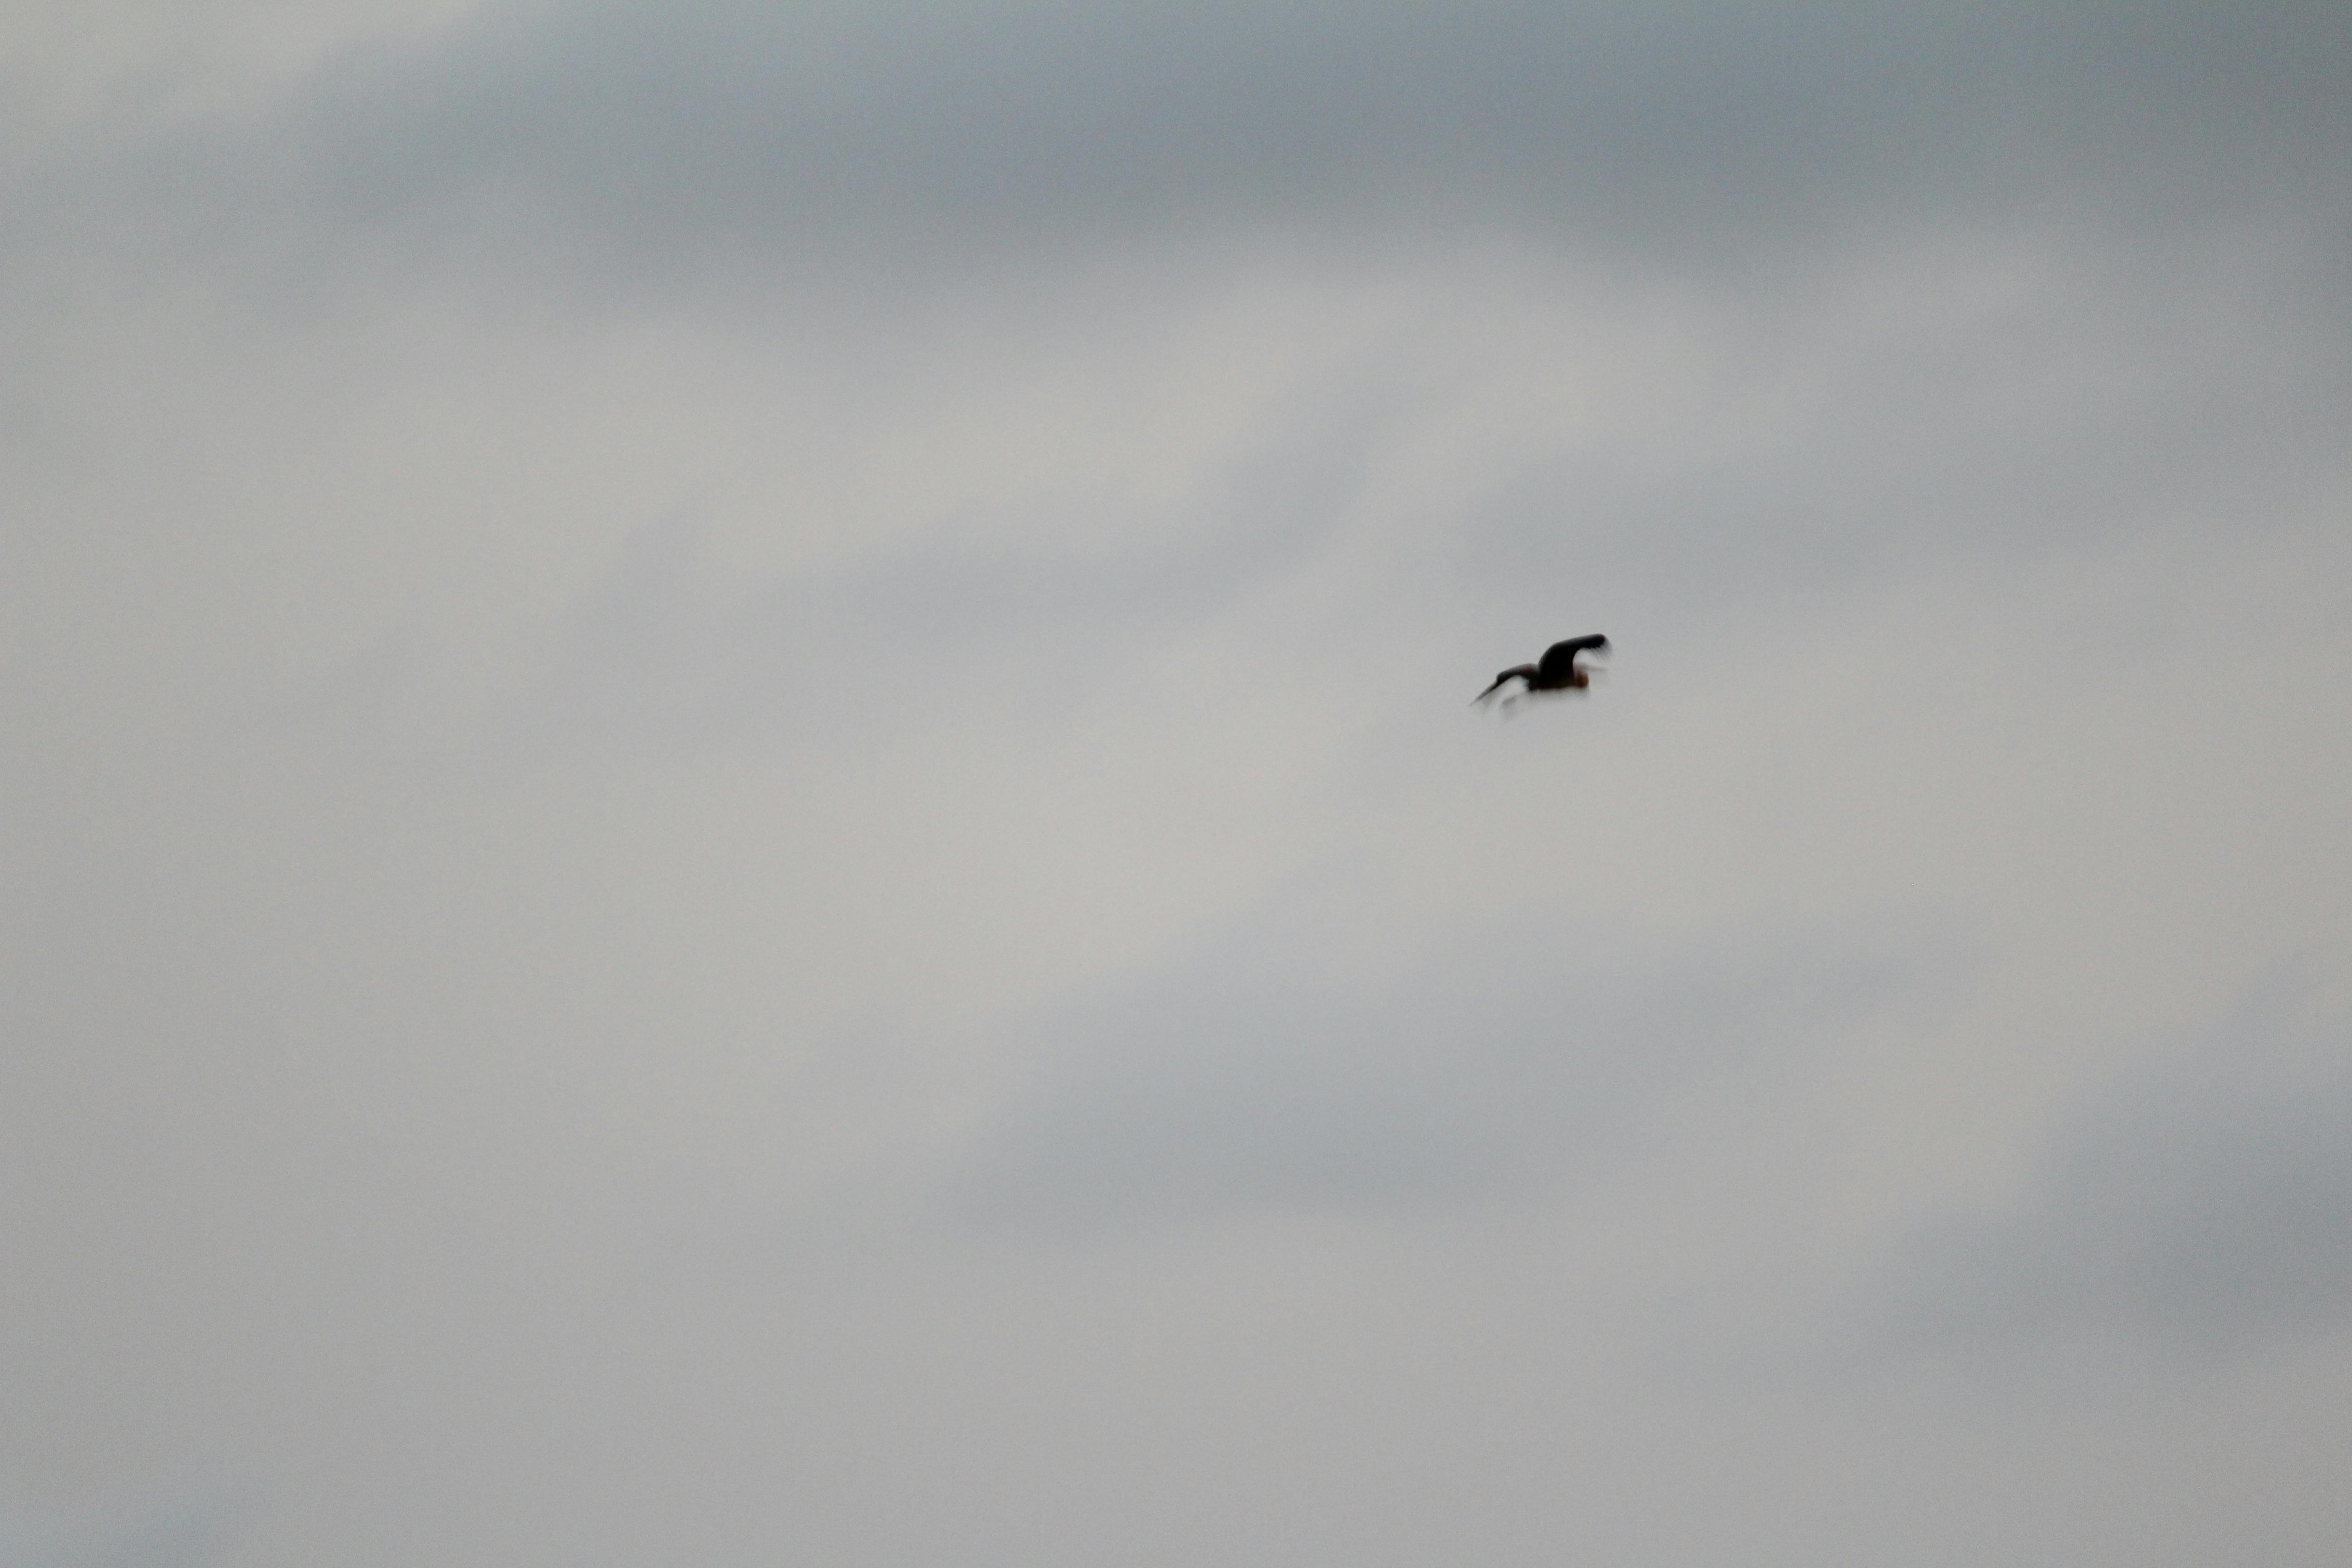 Free stock photo of Hawk flying in the distance